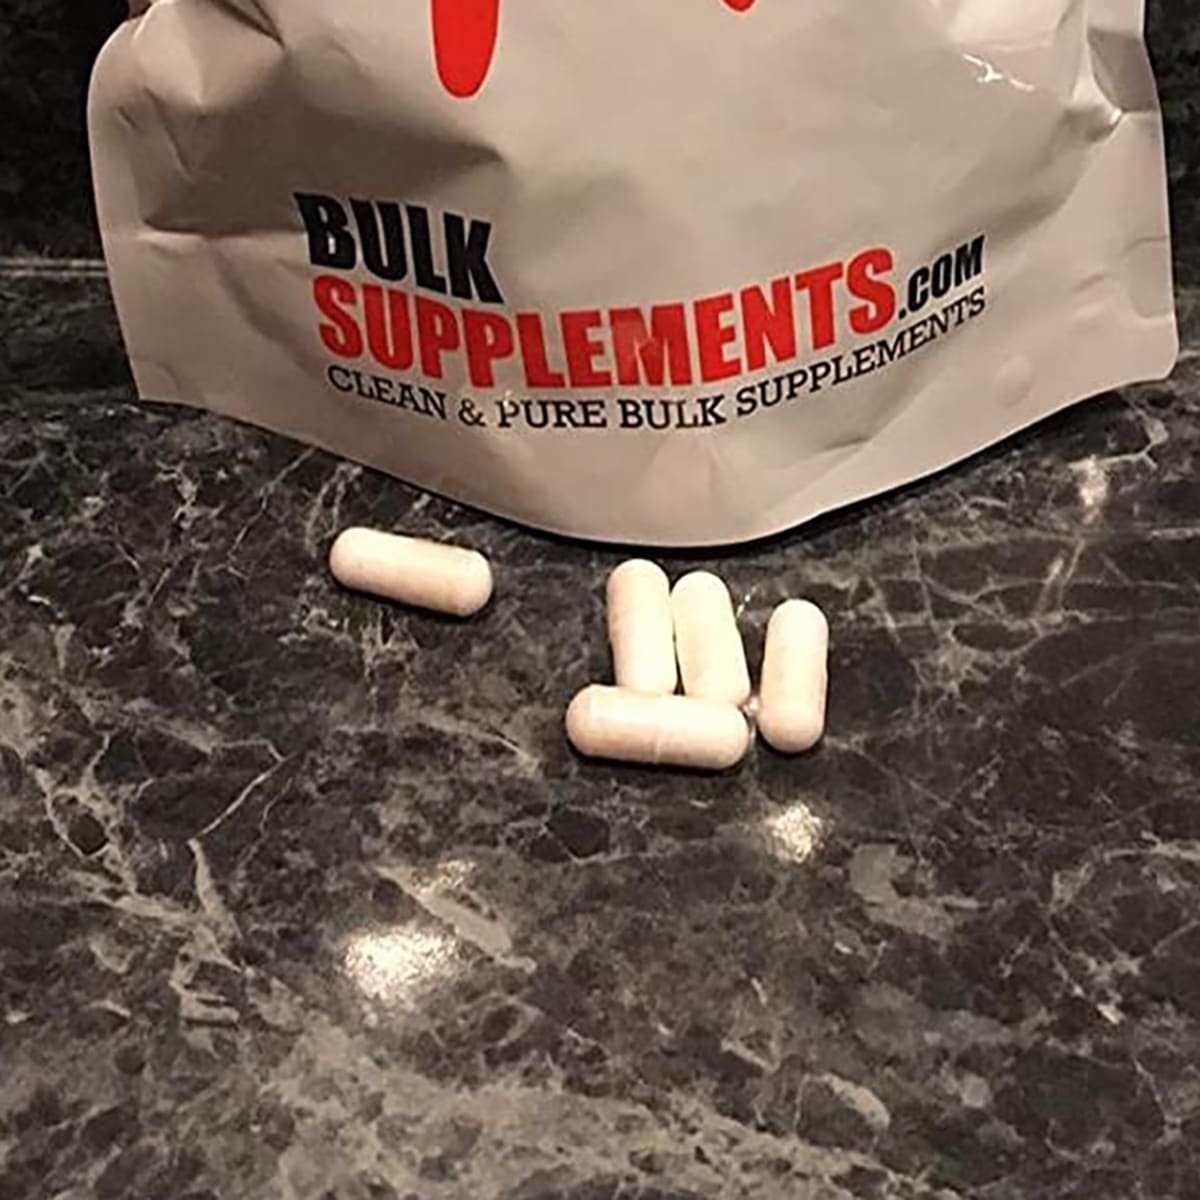 Bulk Supplements Creatine Monohydrate Review: Does It Really Work? 